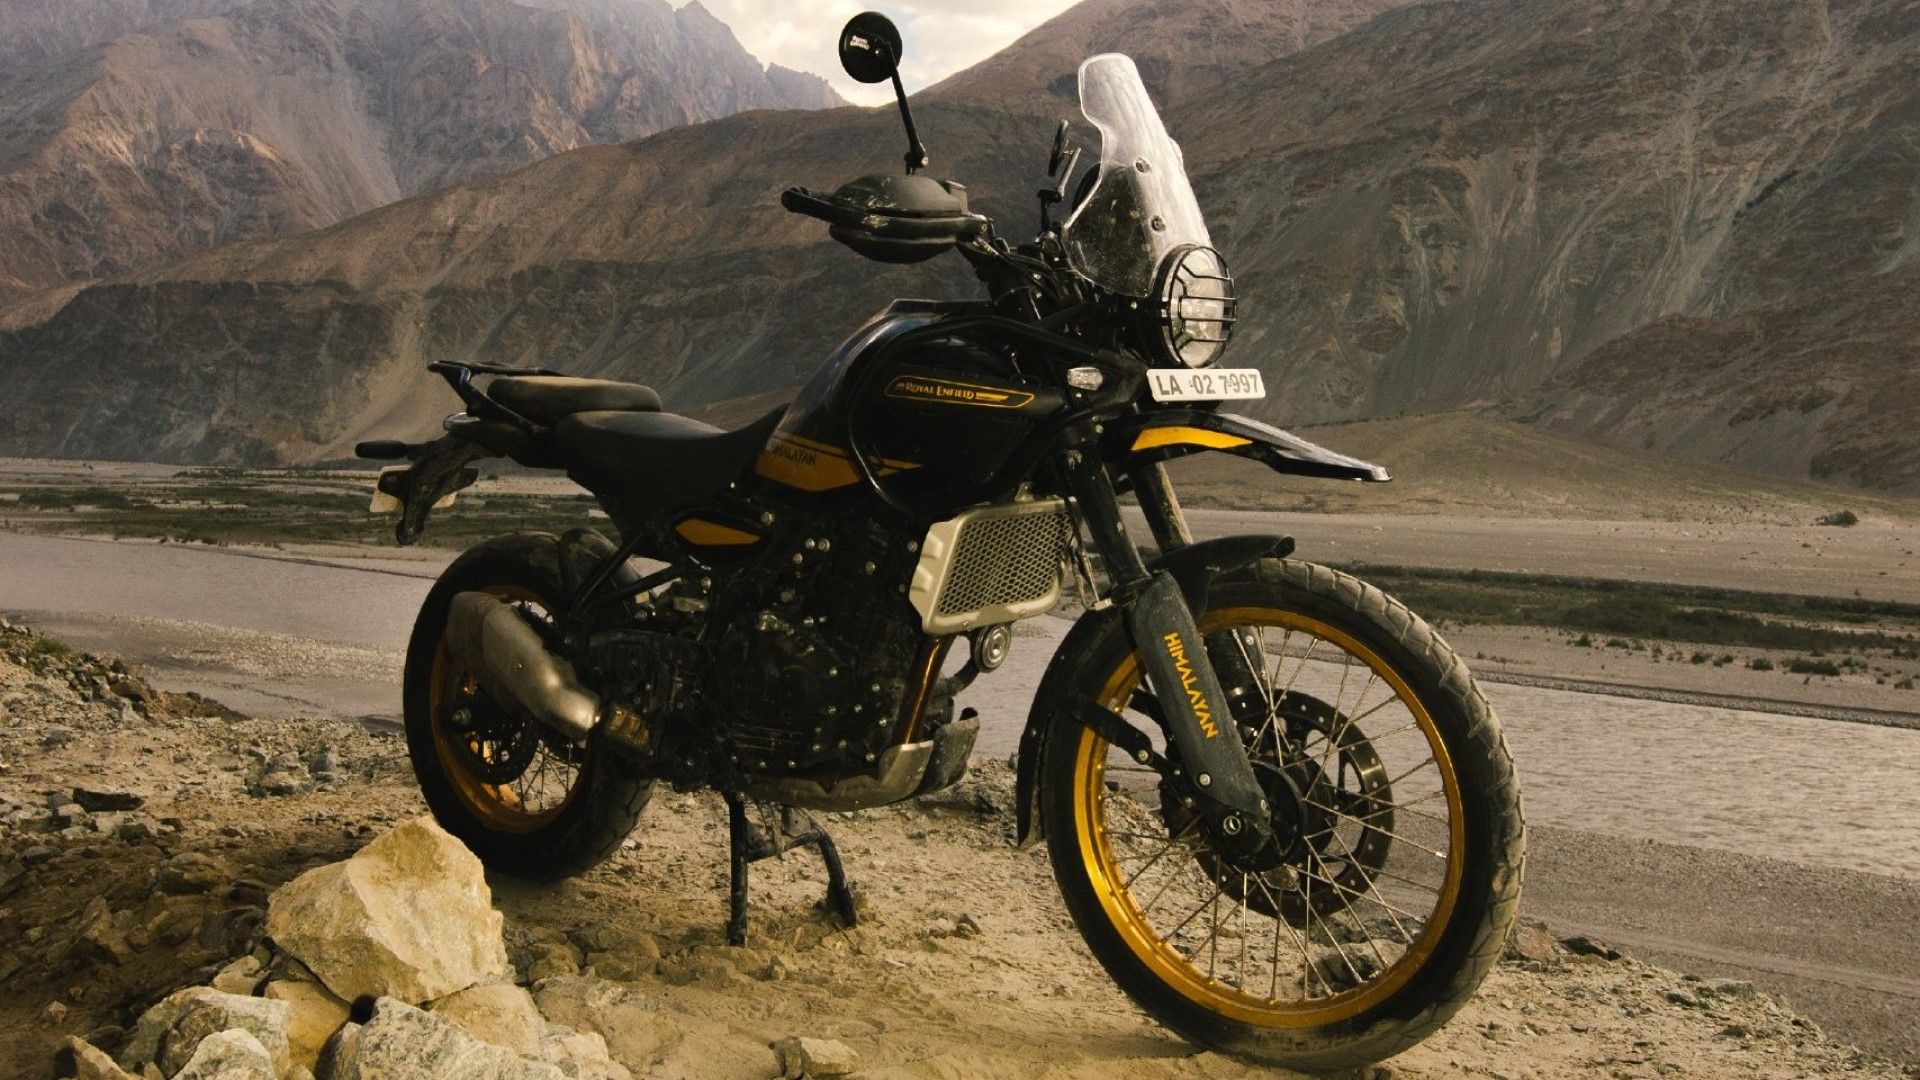 A Closer Look At the Sherpa 450 Engine On The New Royal Enfield Himalayan